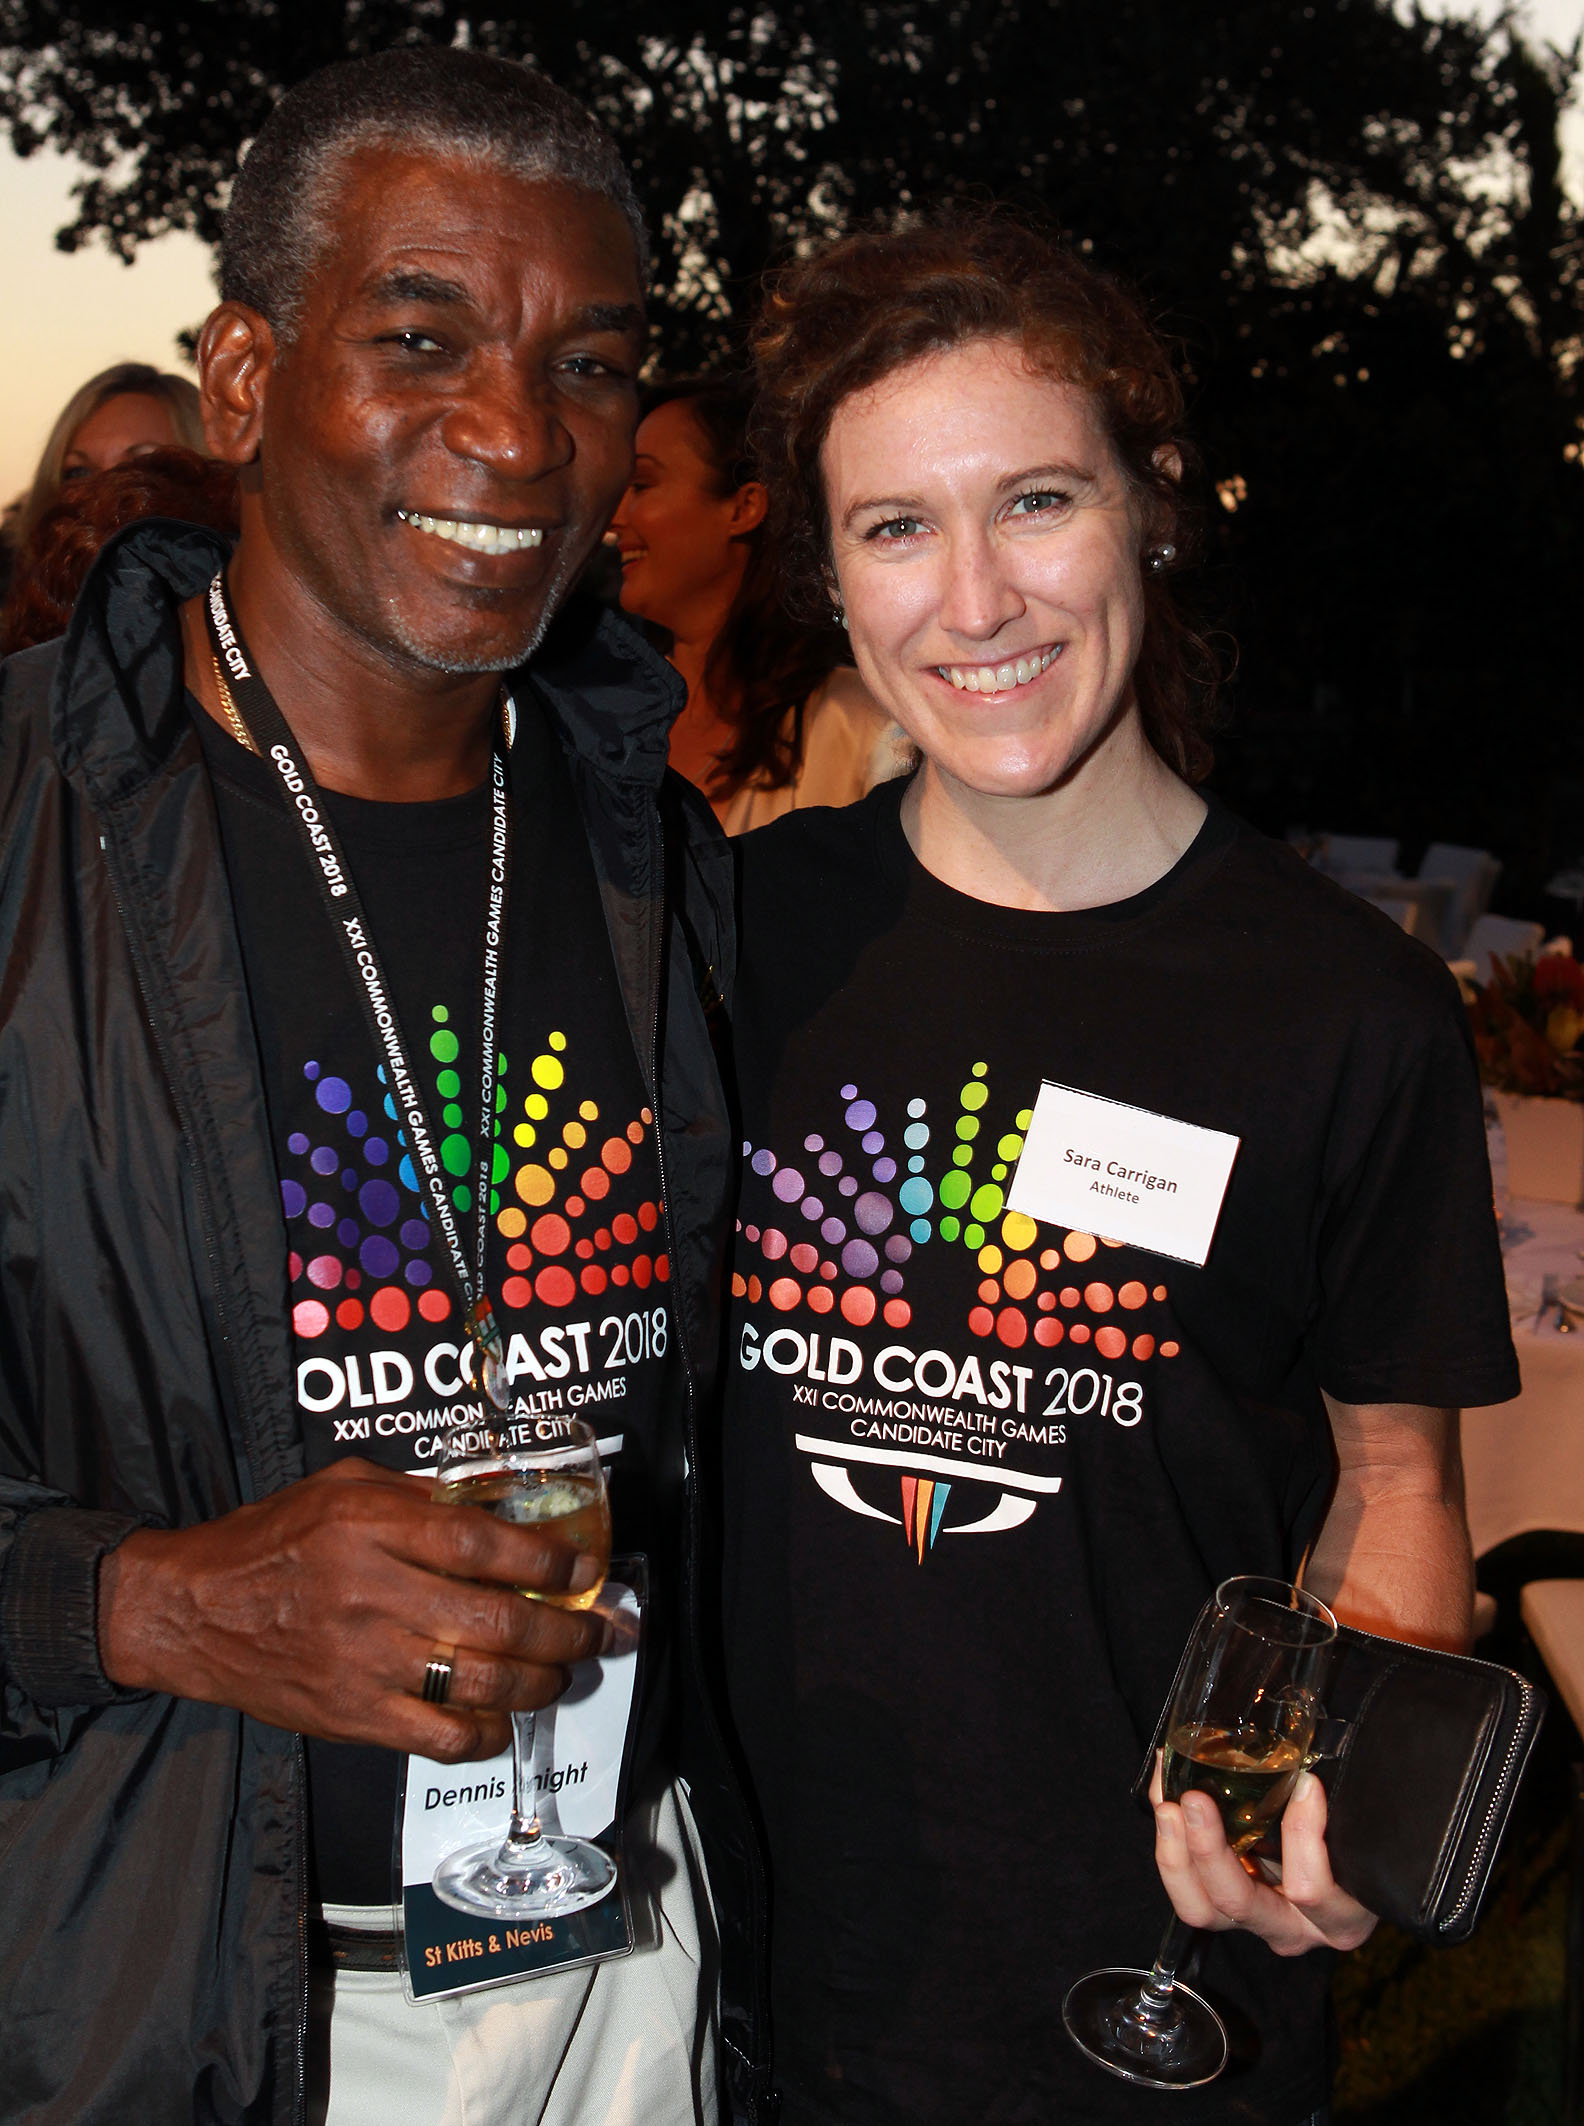 St_Kitts_and_Nevis_delegate_Dennis_Knight_with_Bids_Athlete_Advisory_Committee_member_and_Olympian_Cyclist__Sara_Carrigan__September_2011